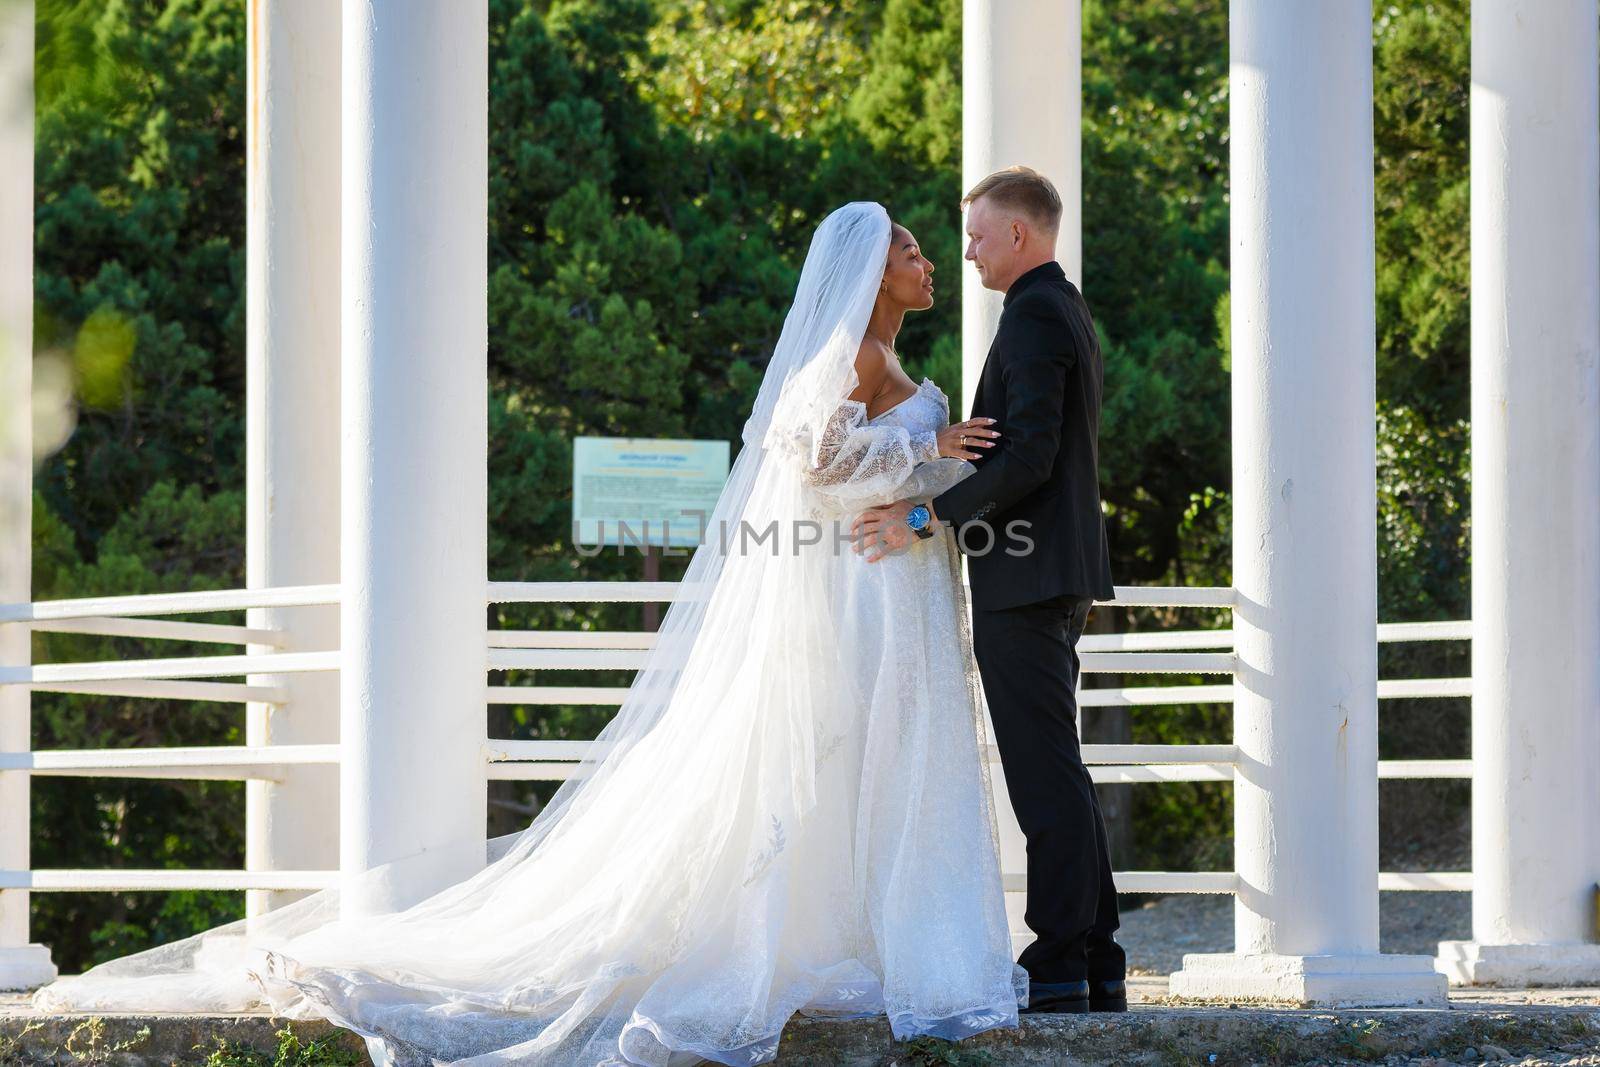 Mixed-racial newlyweds on a walk hugging against the backdrop of a beautiful gazebo